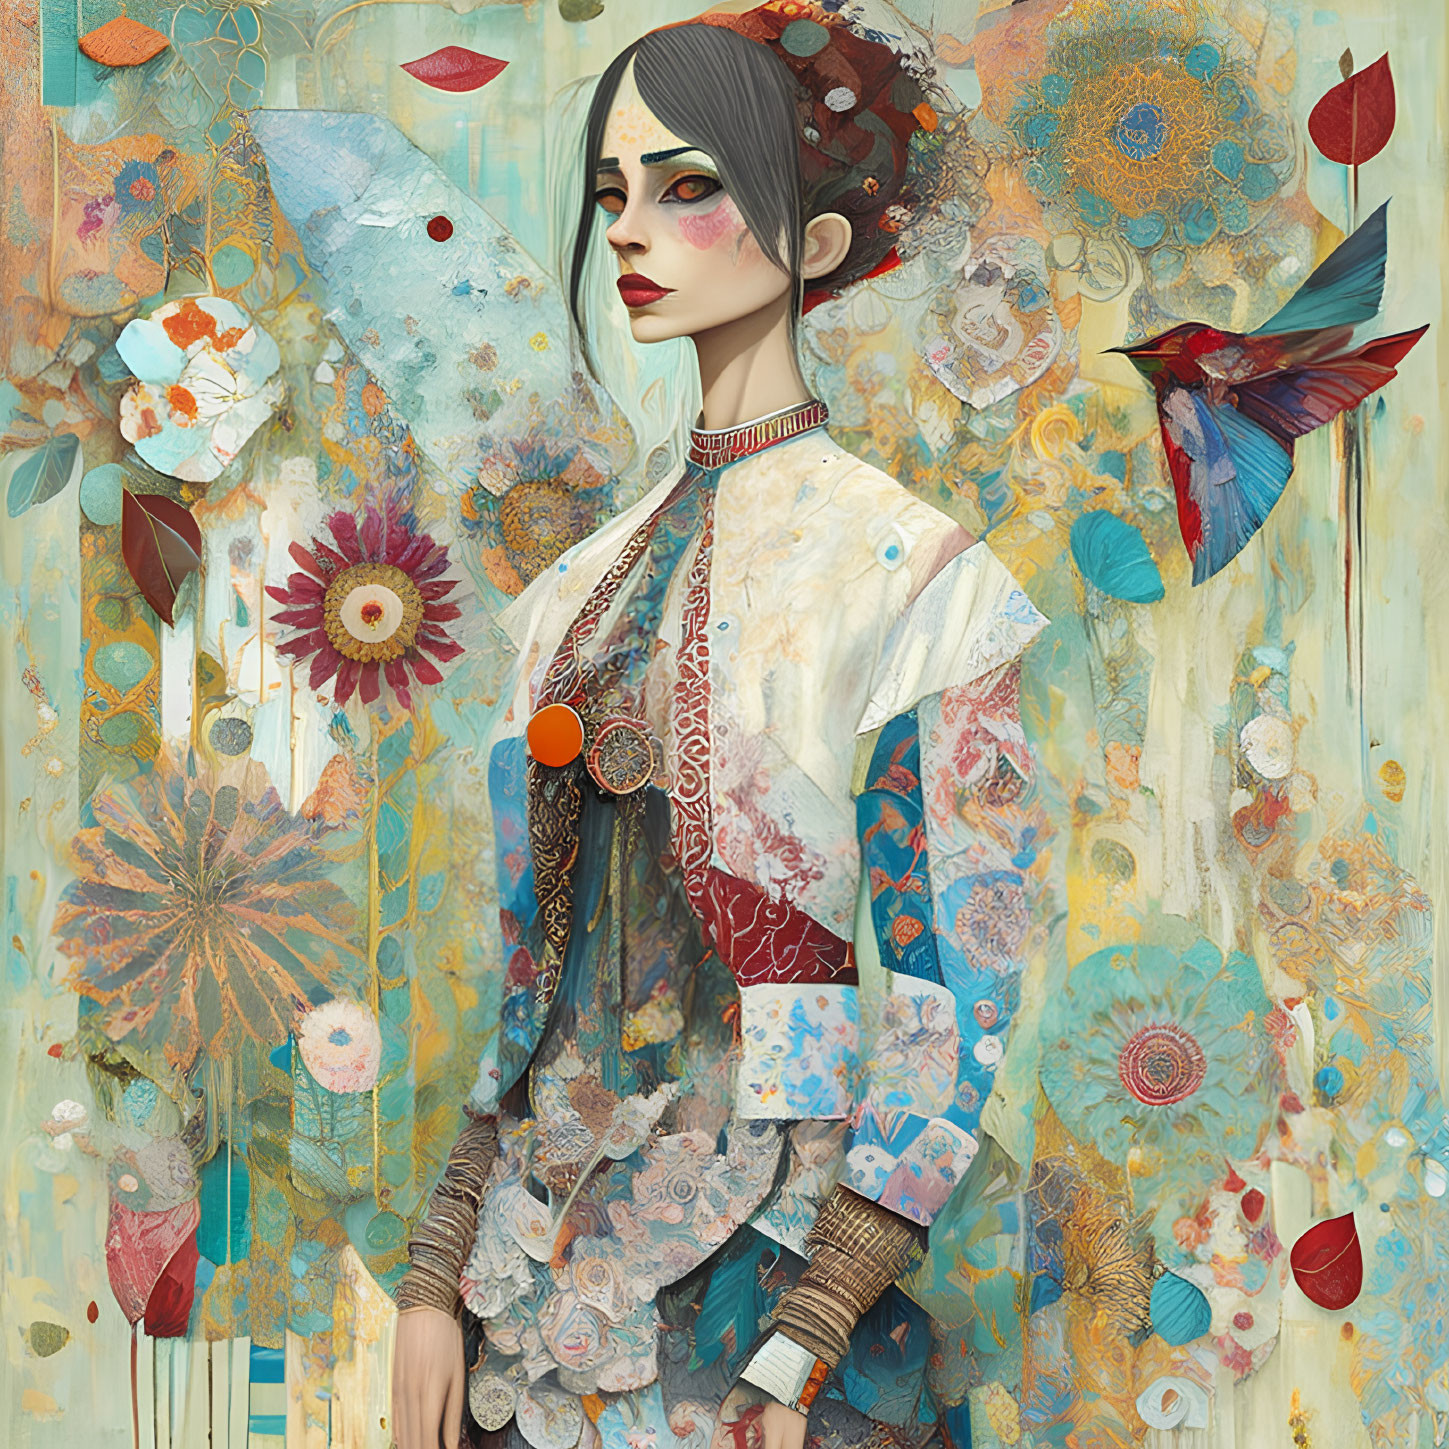 Stylized woman with butterfly motif, floral patterns, and hummingbird in whimsical setting